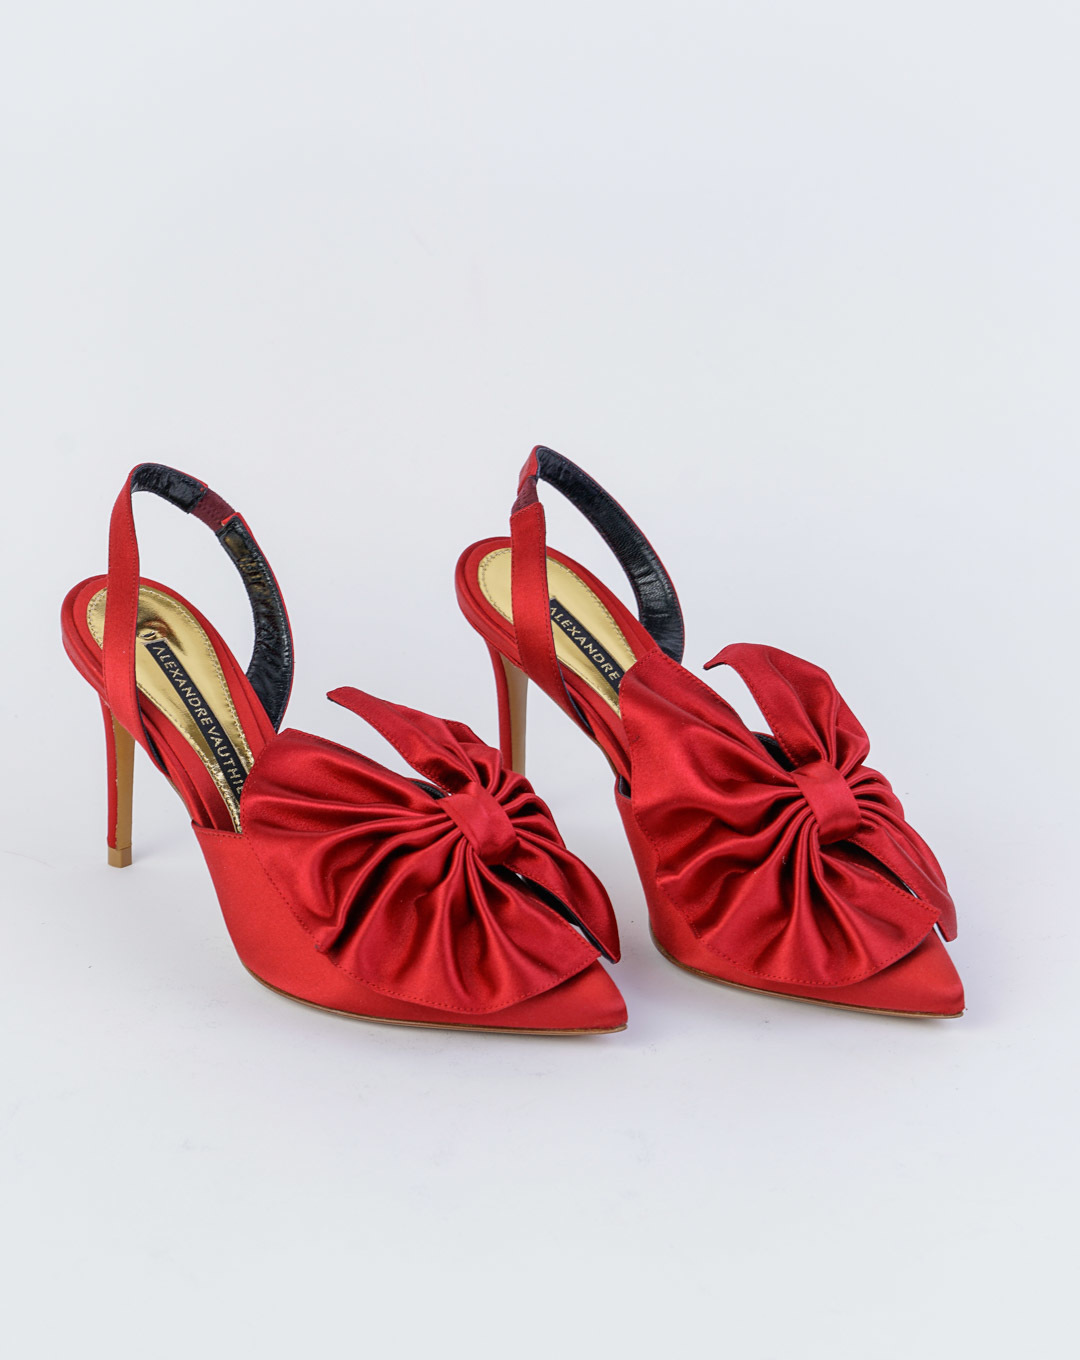 red satin pumps